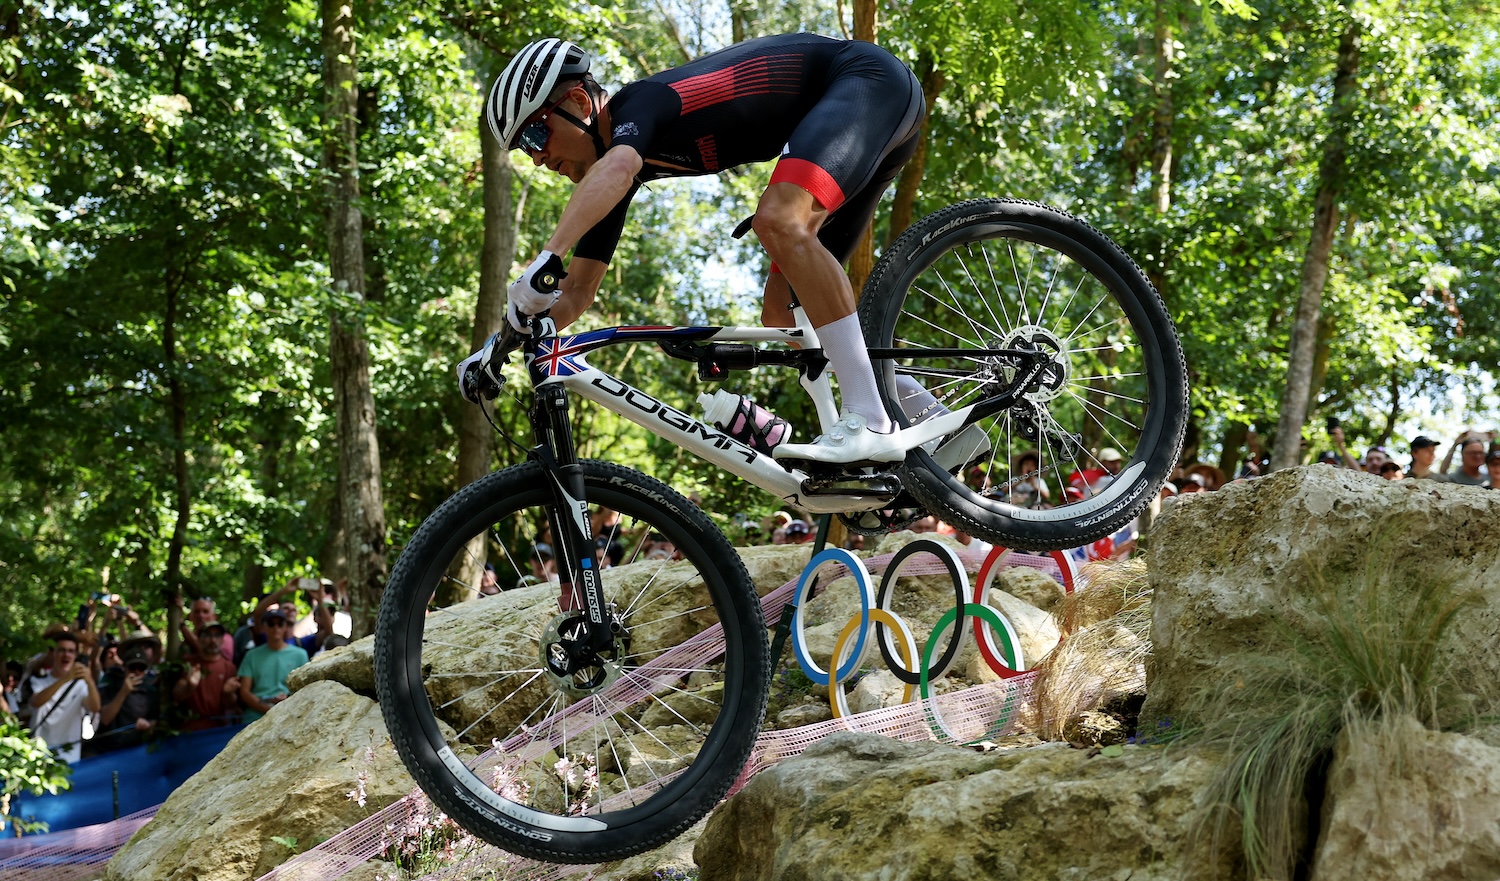 ELANCOURT, FRANCE - JULY 29: Thomas Pidcock of Team Great Britain competes during the Men's Cross-Country on day three of the Olympic Games Paris 2024 at Elancourt Hill on July 29, 2024 in Elancourt, France. (Photo by Alex Broadway/Getty Images)